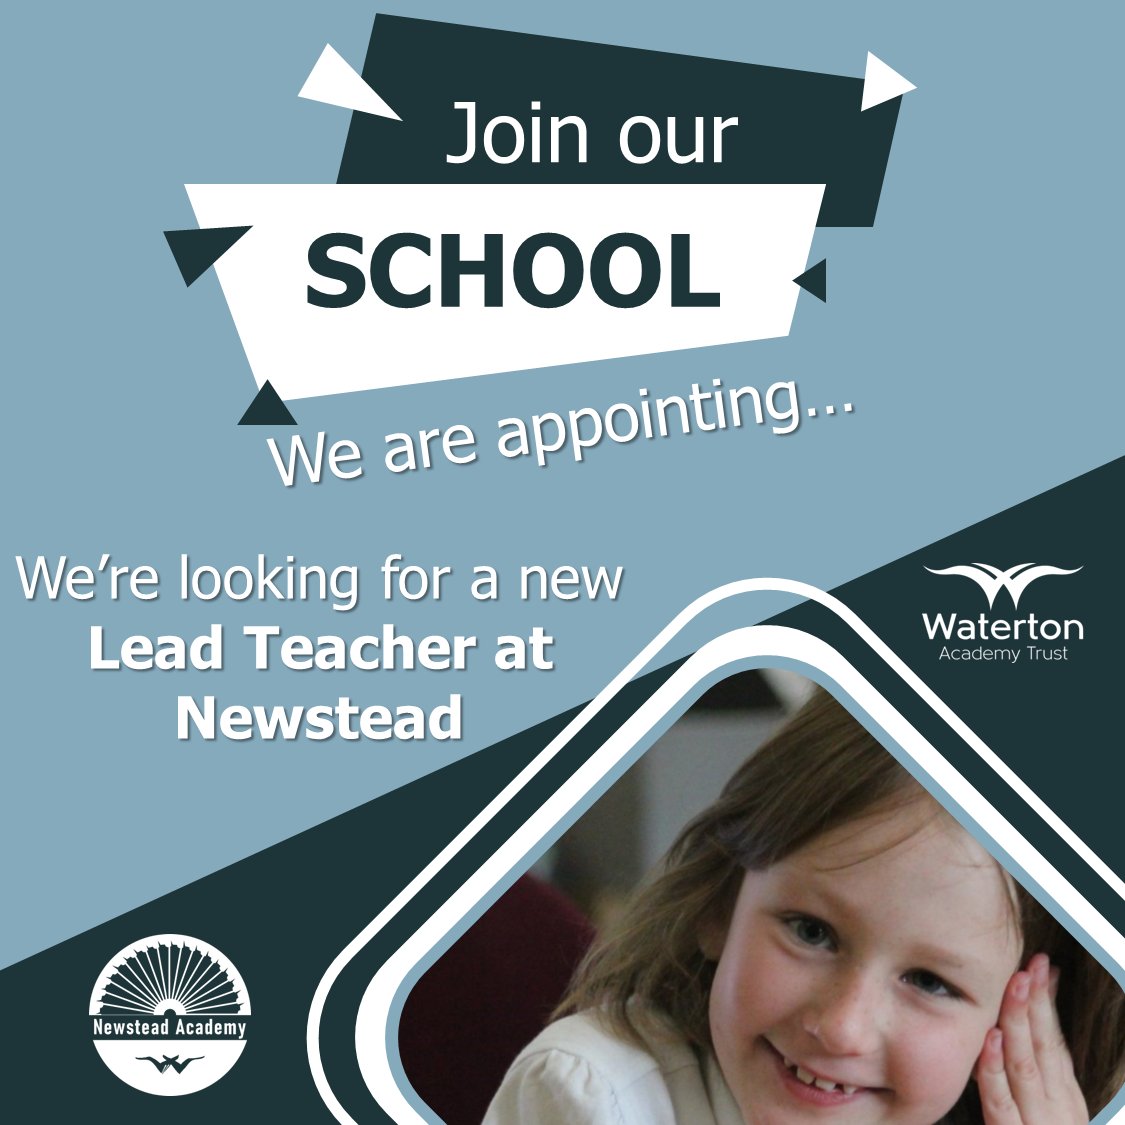 🌟Looking to join a fantastic team? 💼Role: Lead Teacher 📍 Location: Newstead Academy, Barnsley 🔗For more information regarding the role and how to apply, visit our site at watertonacademytrust.org/recruitment/ #teachingjobs #educationjobs